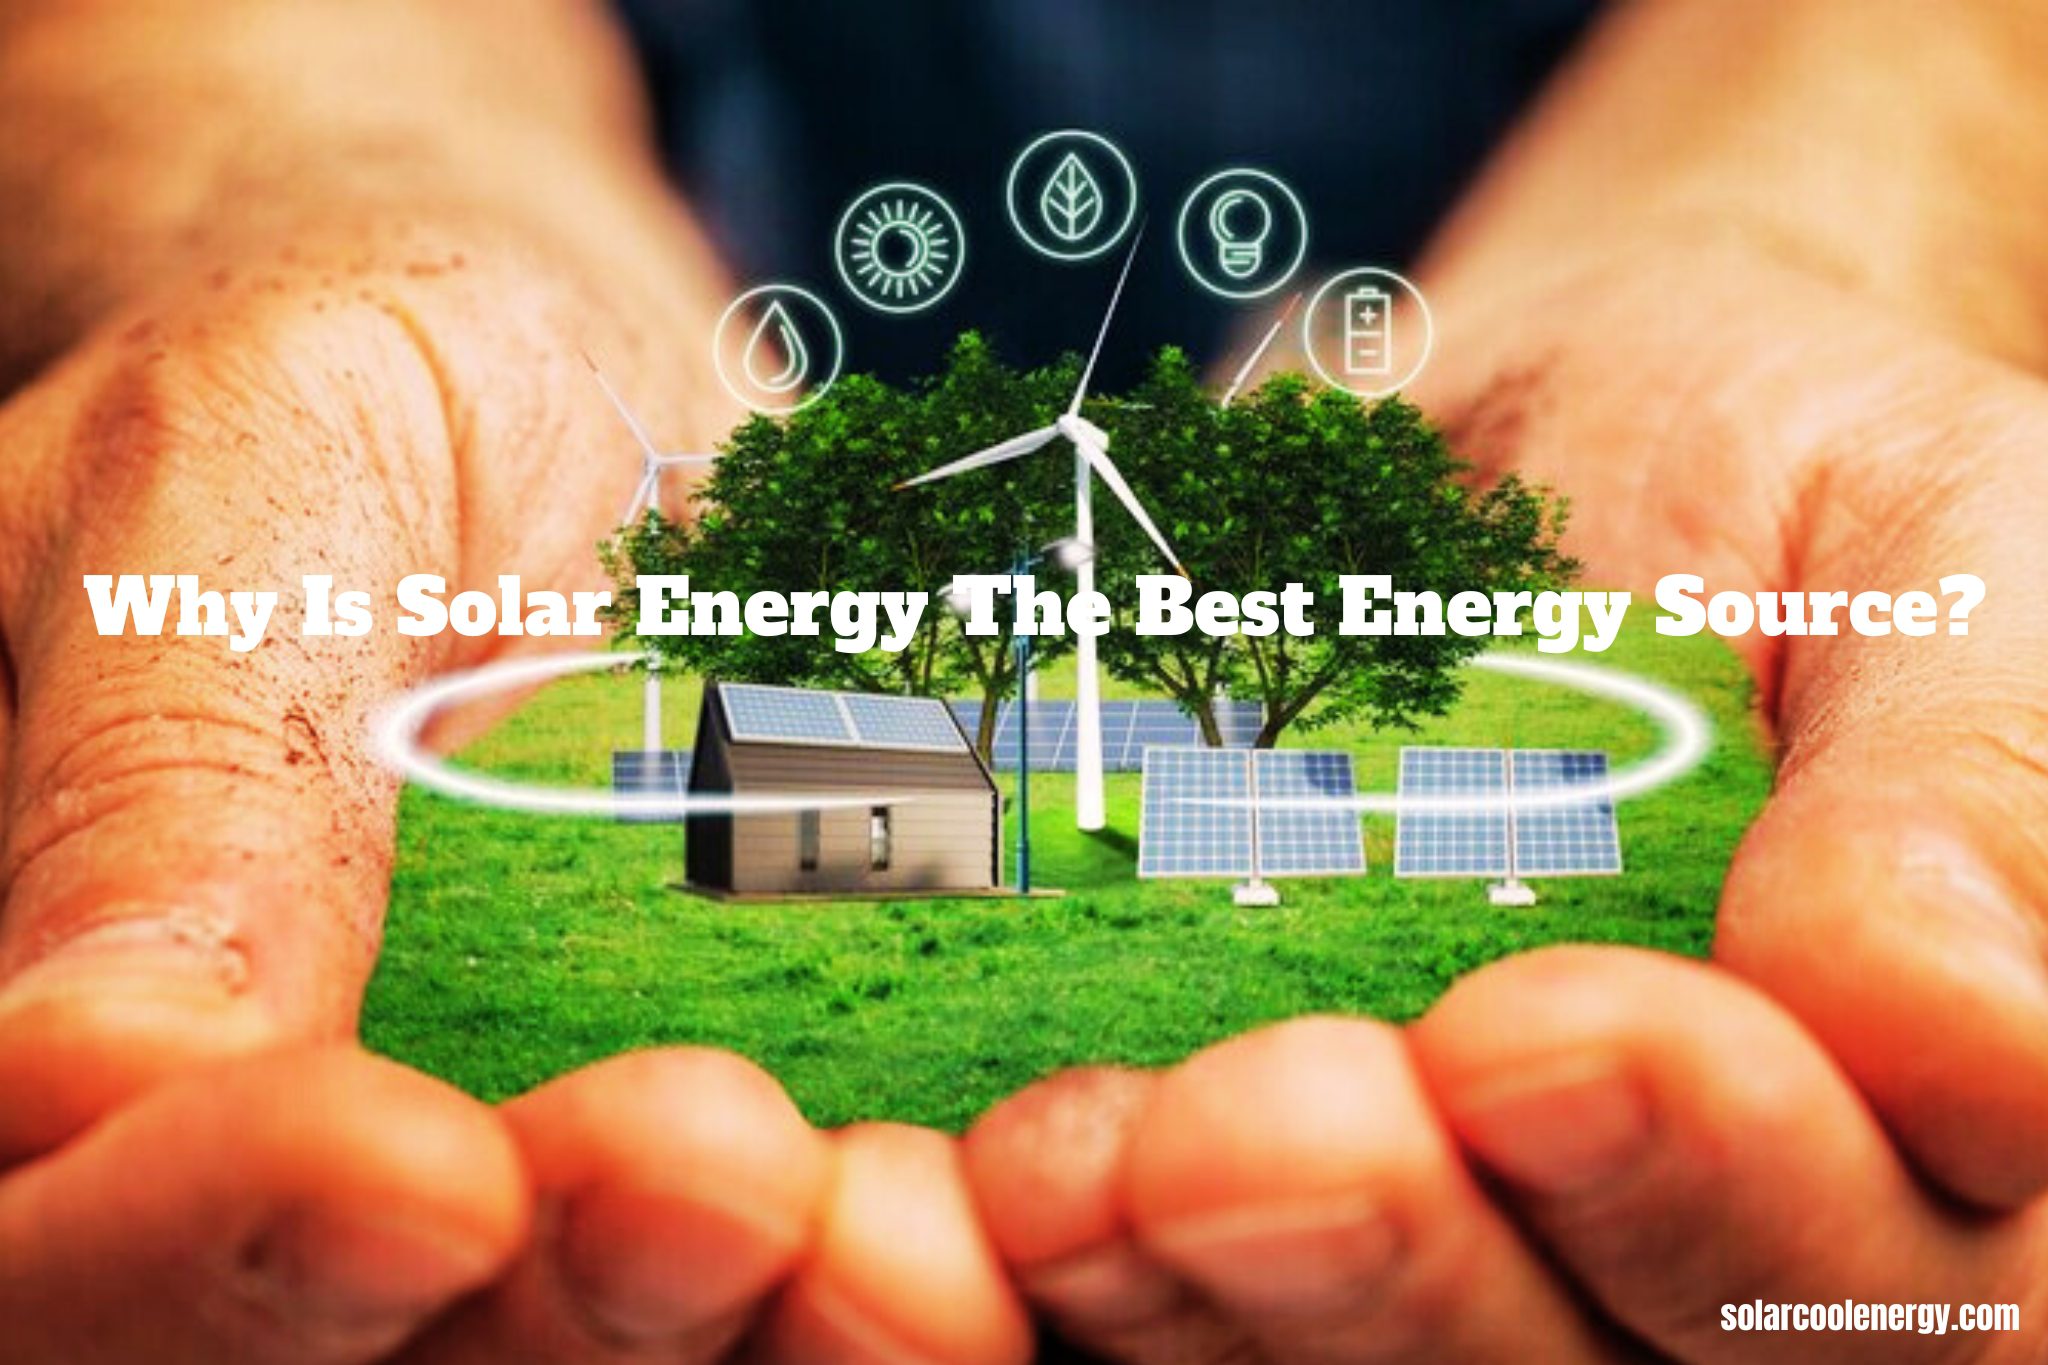 Why Is Solar Energy The Best Energy Source